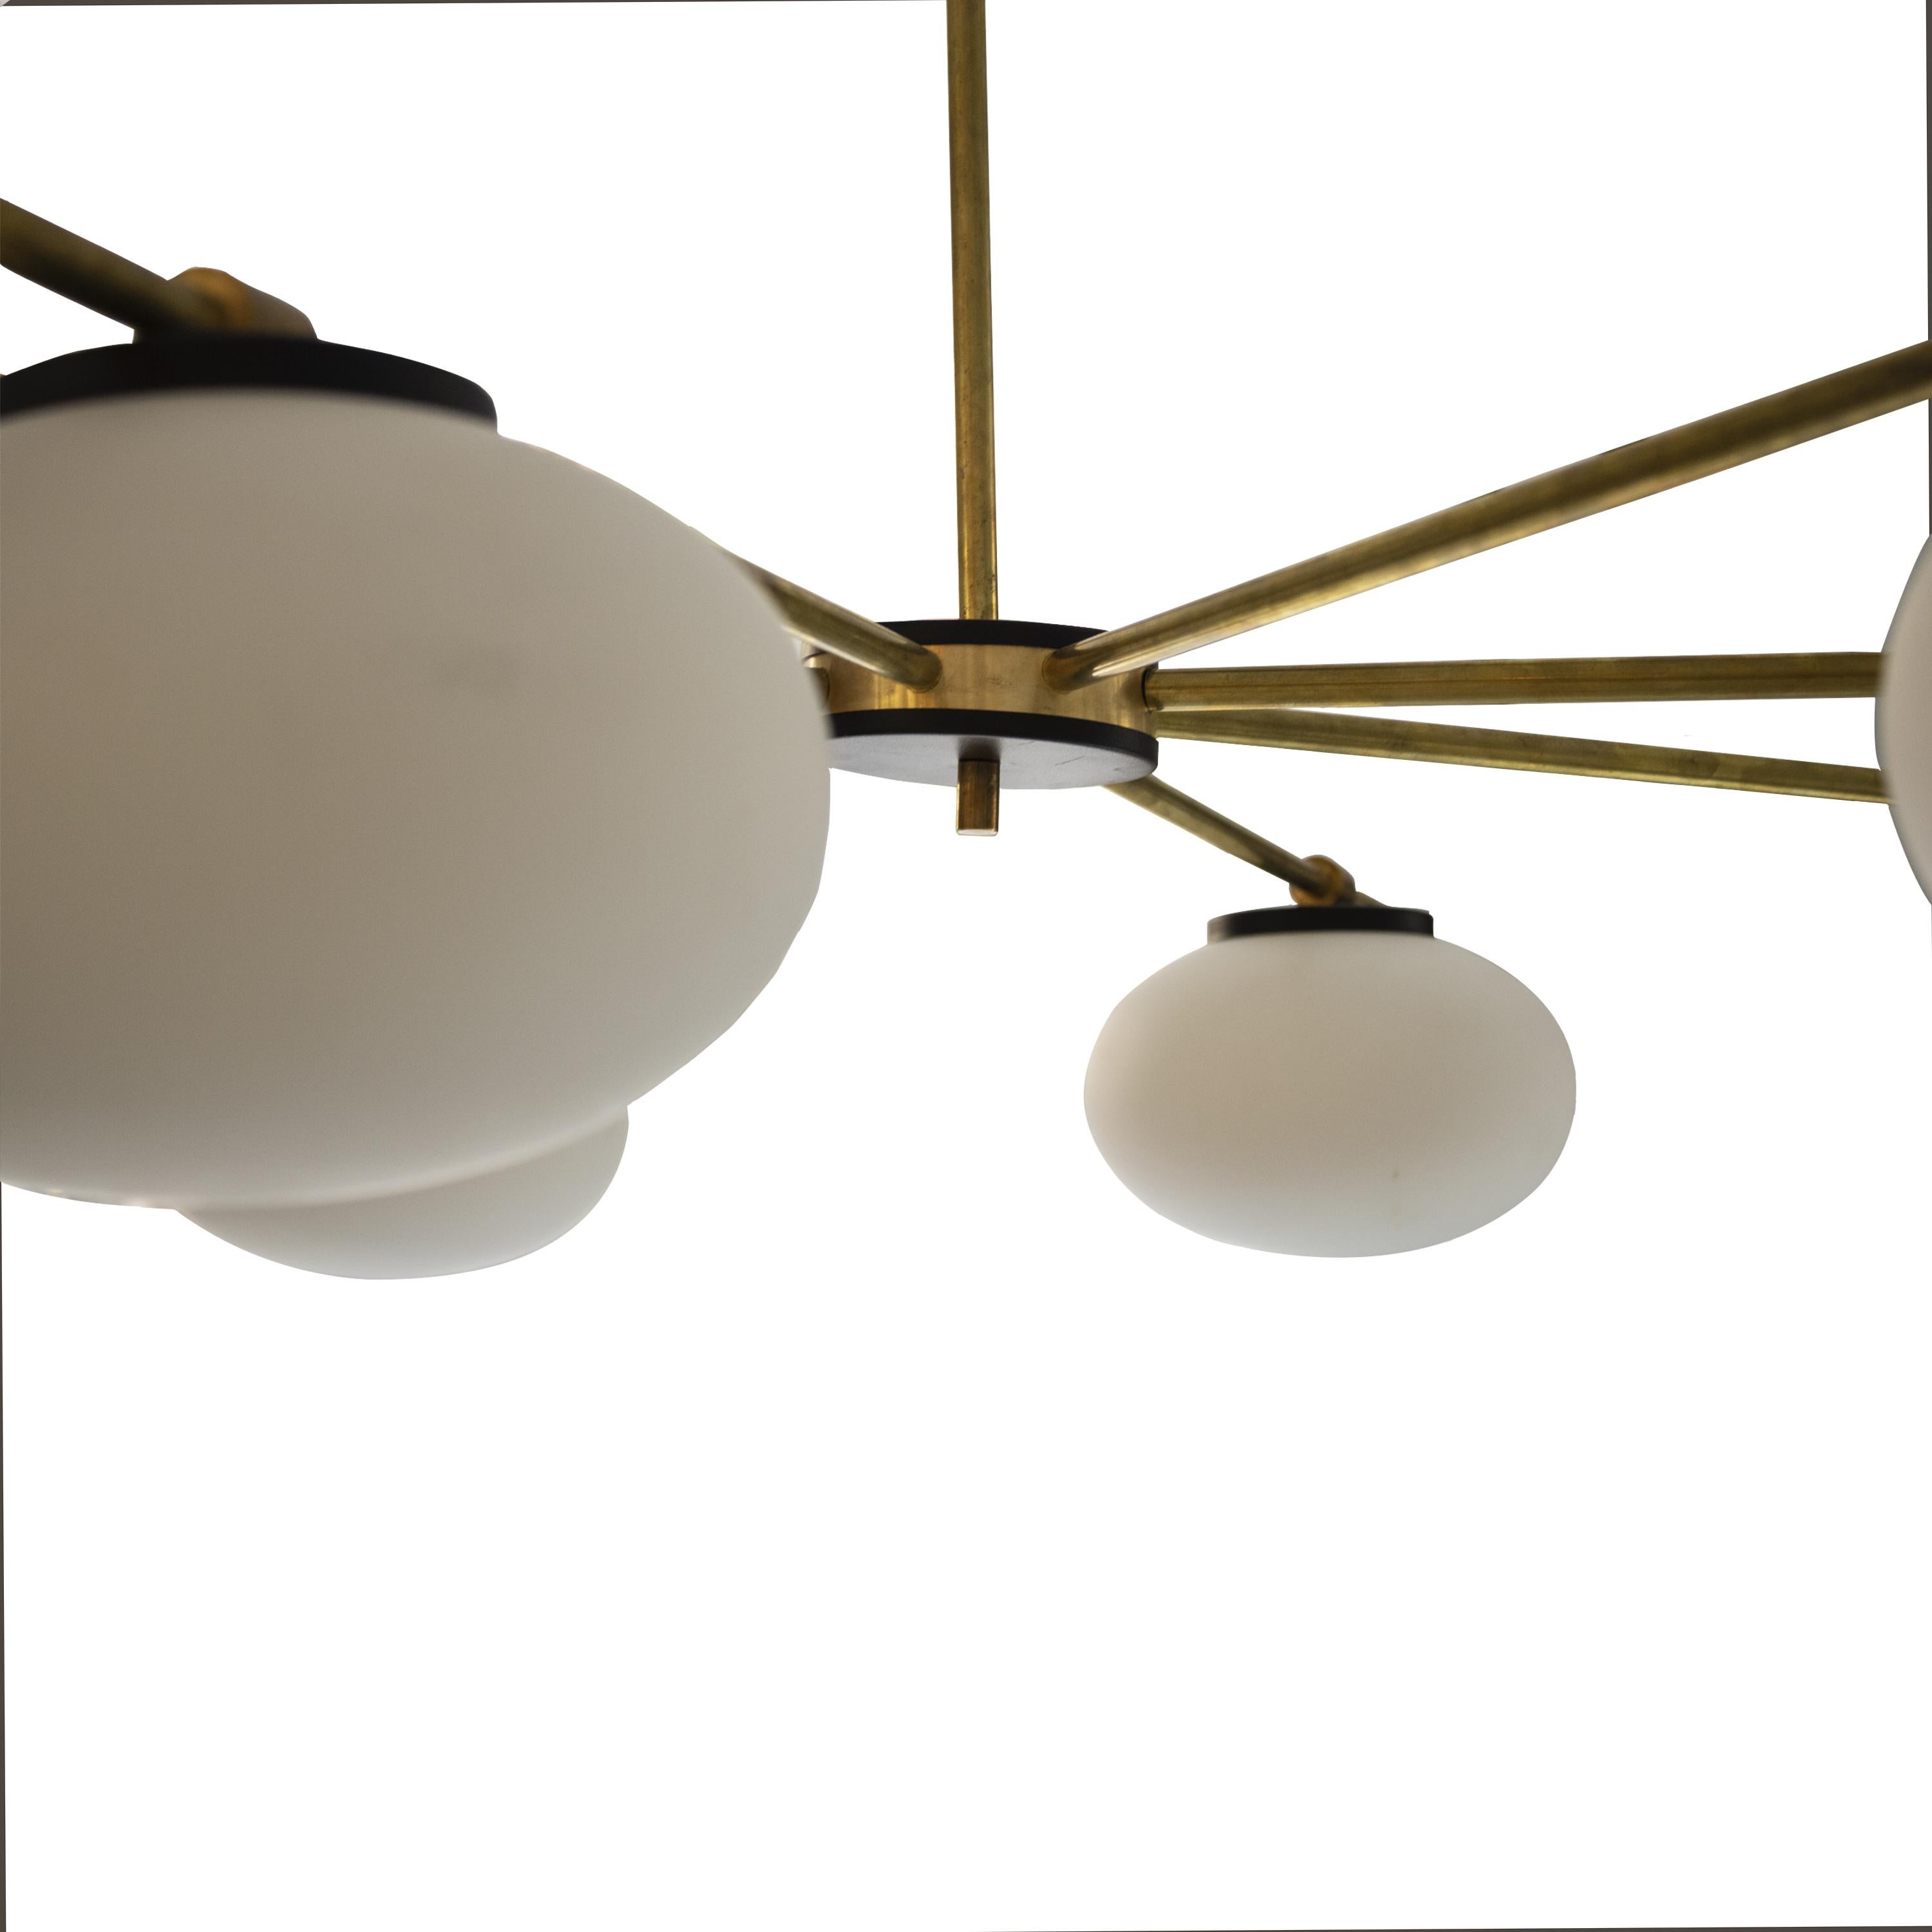 Spanish Contemporary Stilnovo Style Brass Glass Suspension Lamp by IKB191, Spain, 2023 For Sale